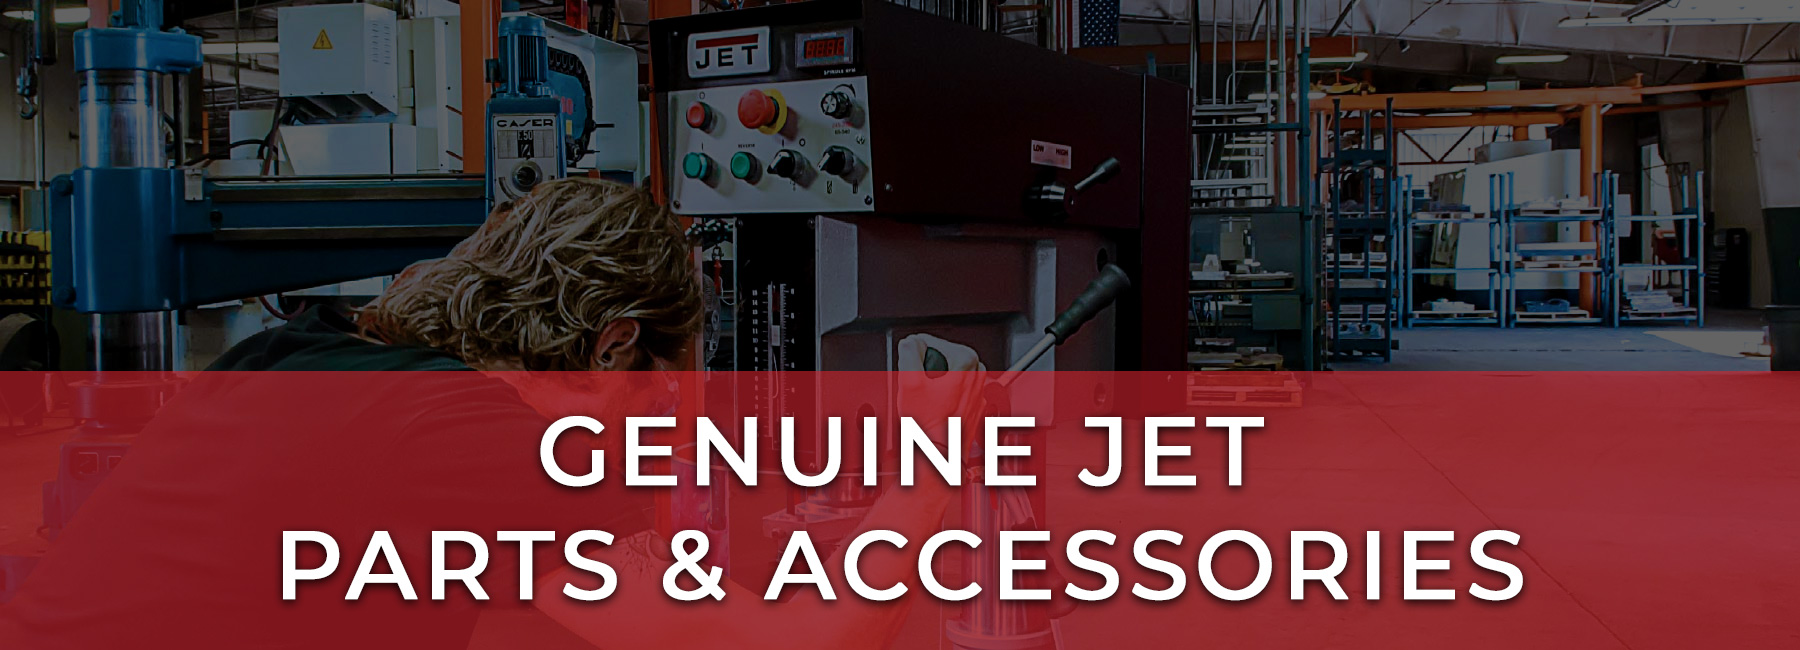 Jet Tools Parts Store Home